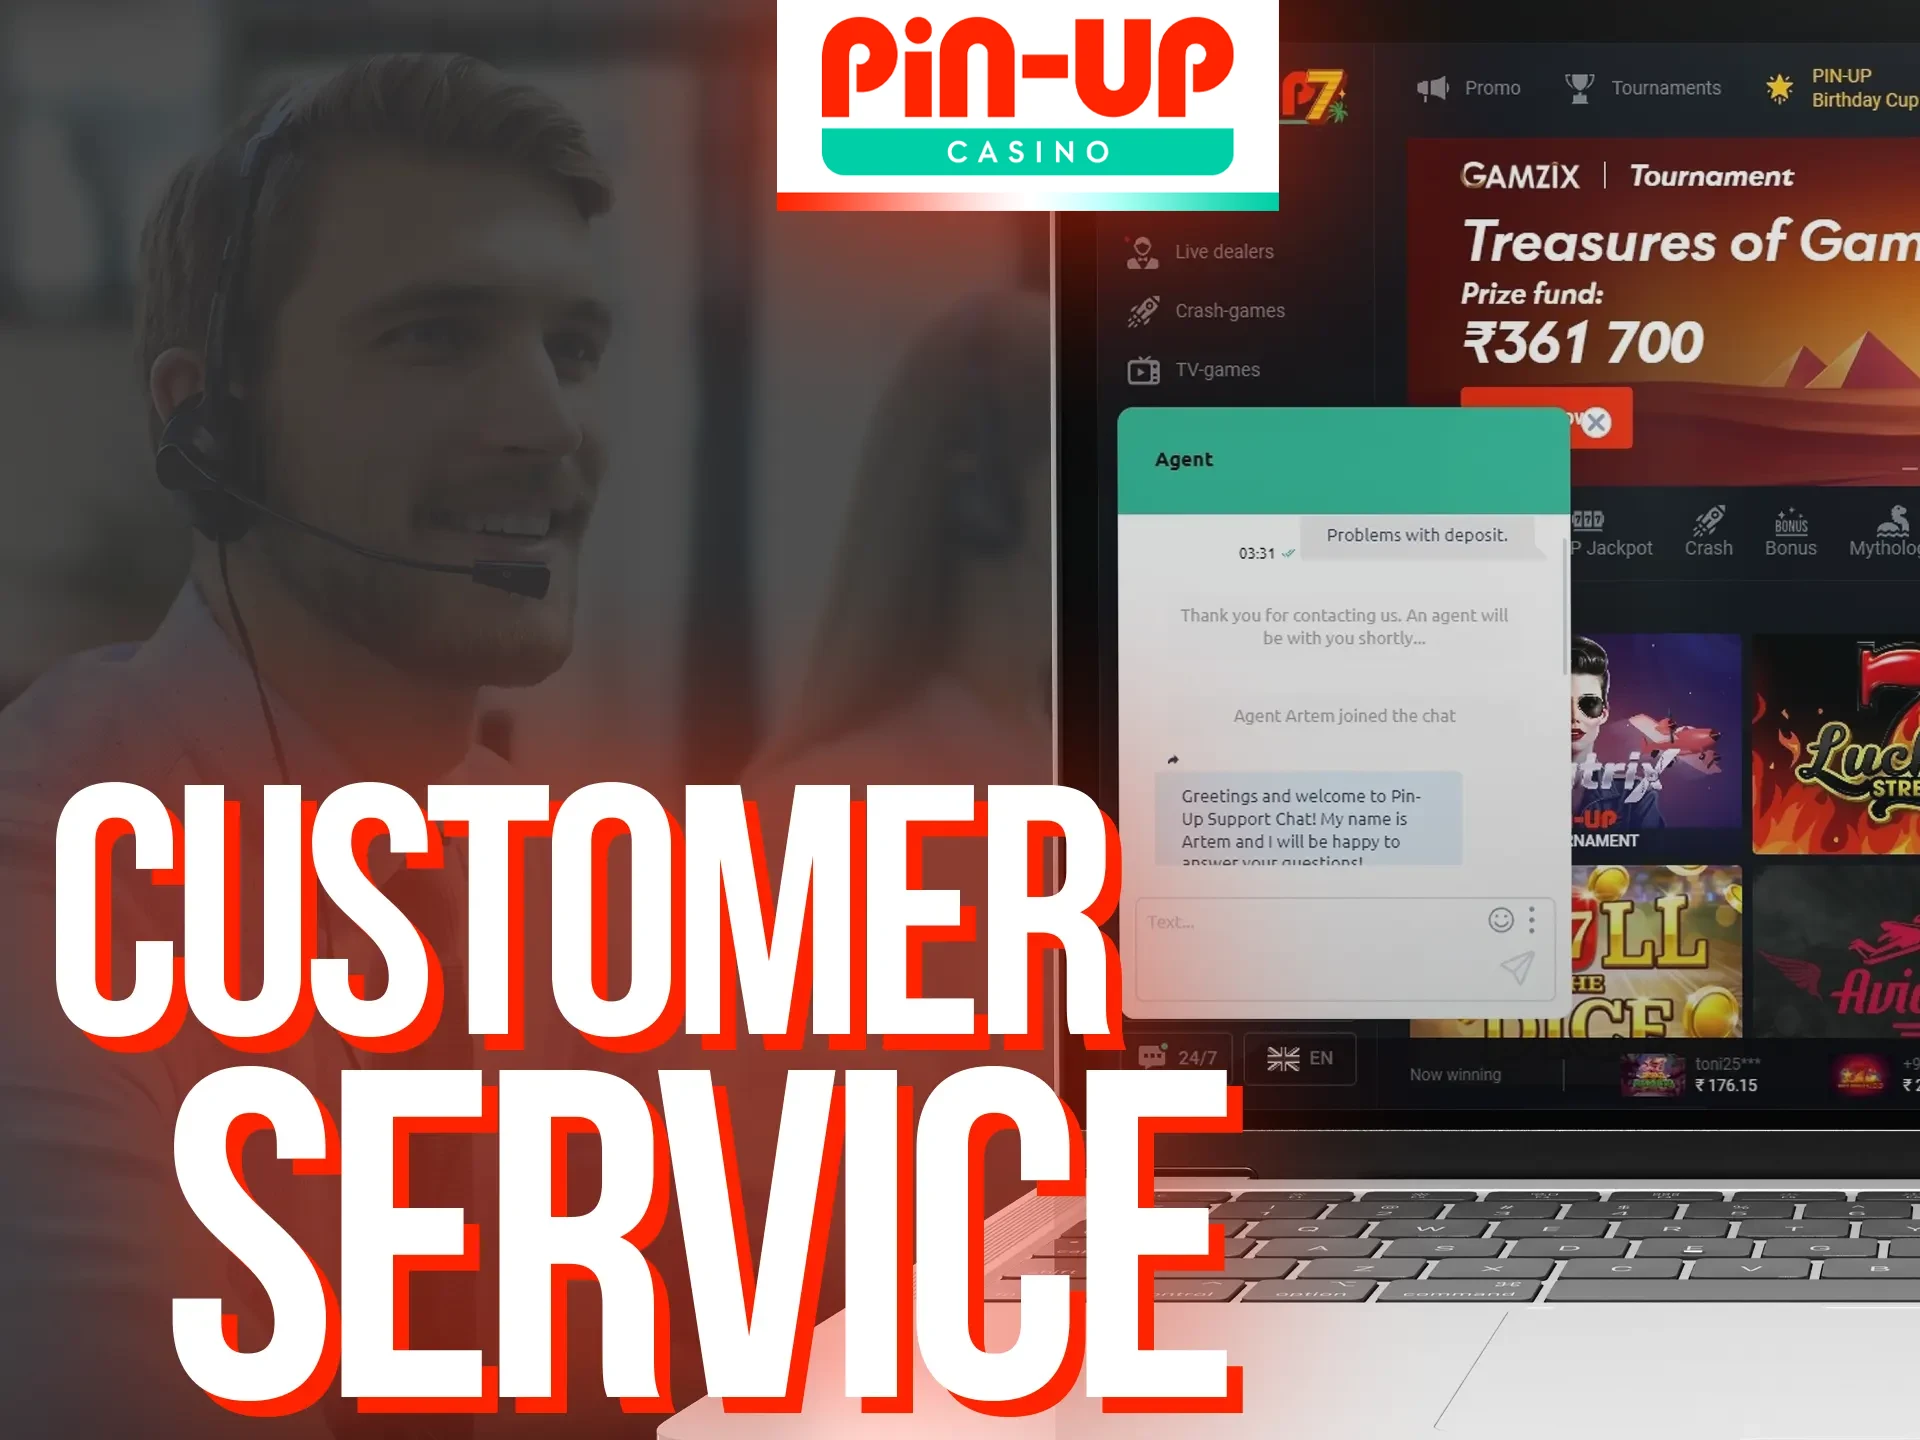 Ask a question to Pin-Up Casino's customer support team.